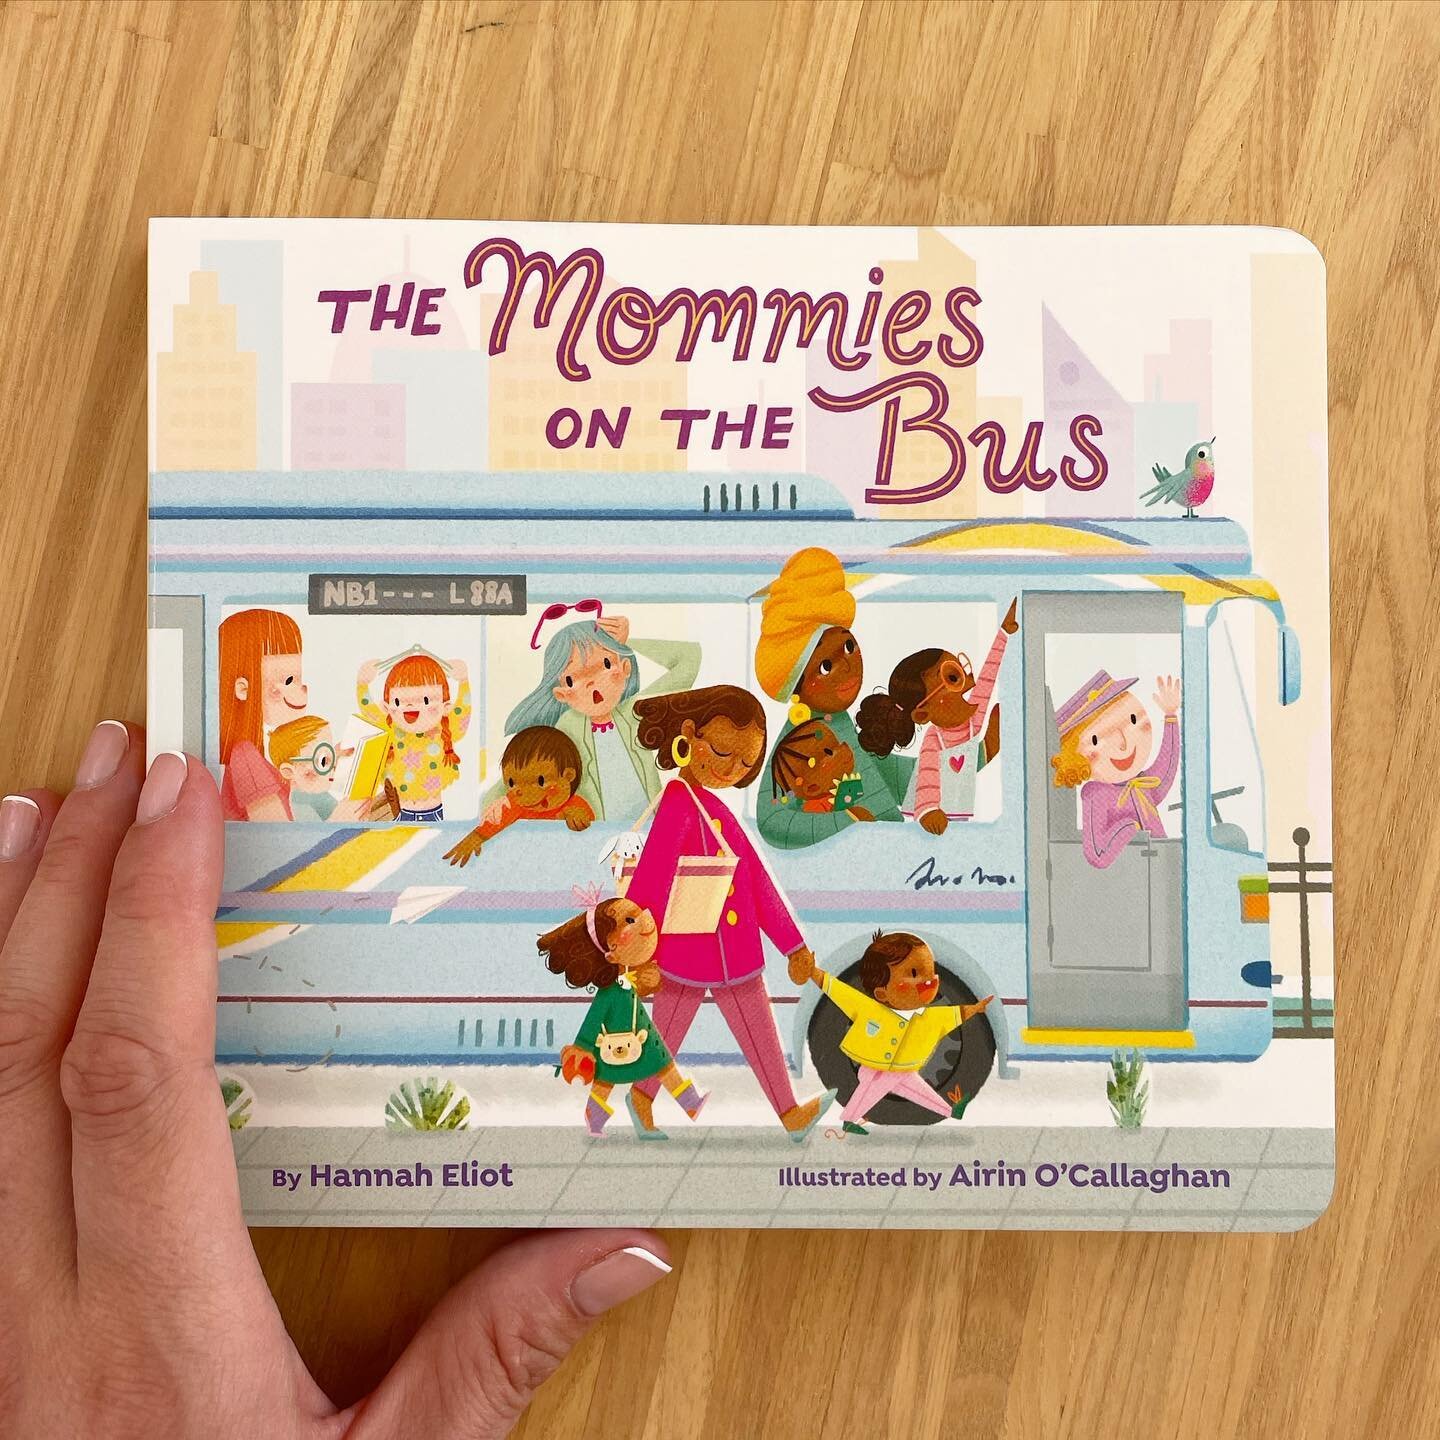 The Mommies On The Bus! ⭐️ Pre-order your copy now (Amazon, Barnes &amp; Noble, and anywhere else where books are sold!). Thank you @simonkids @simonandschuster Hannah Eliot, @katekpowell en @astoundusagency for the opportunity to illustrate this swe